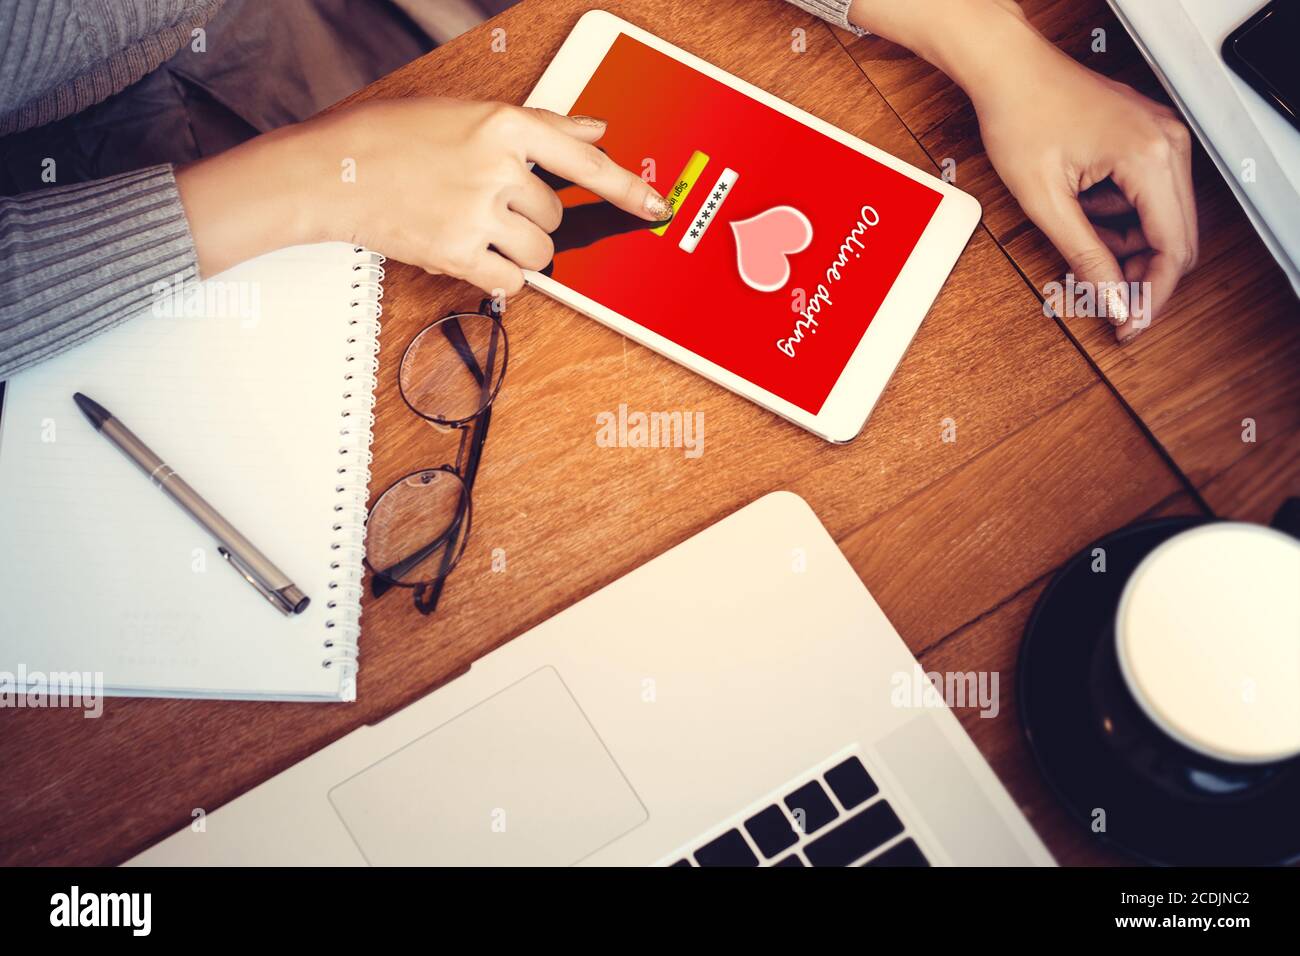 online love concept: girl using a digital generated tablet with dating site on the screen, hardwood desktop and stationery on background Stock Photo